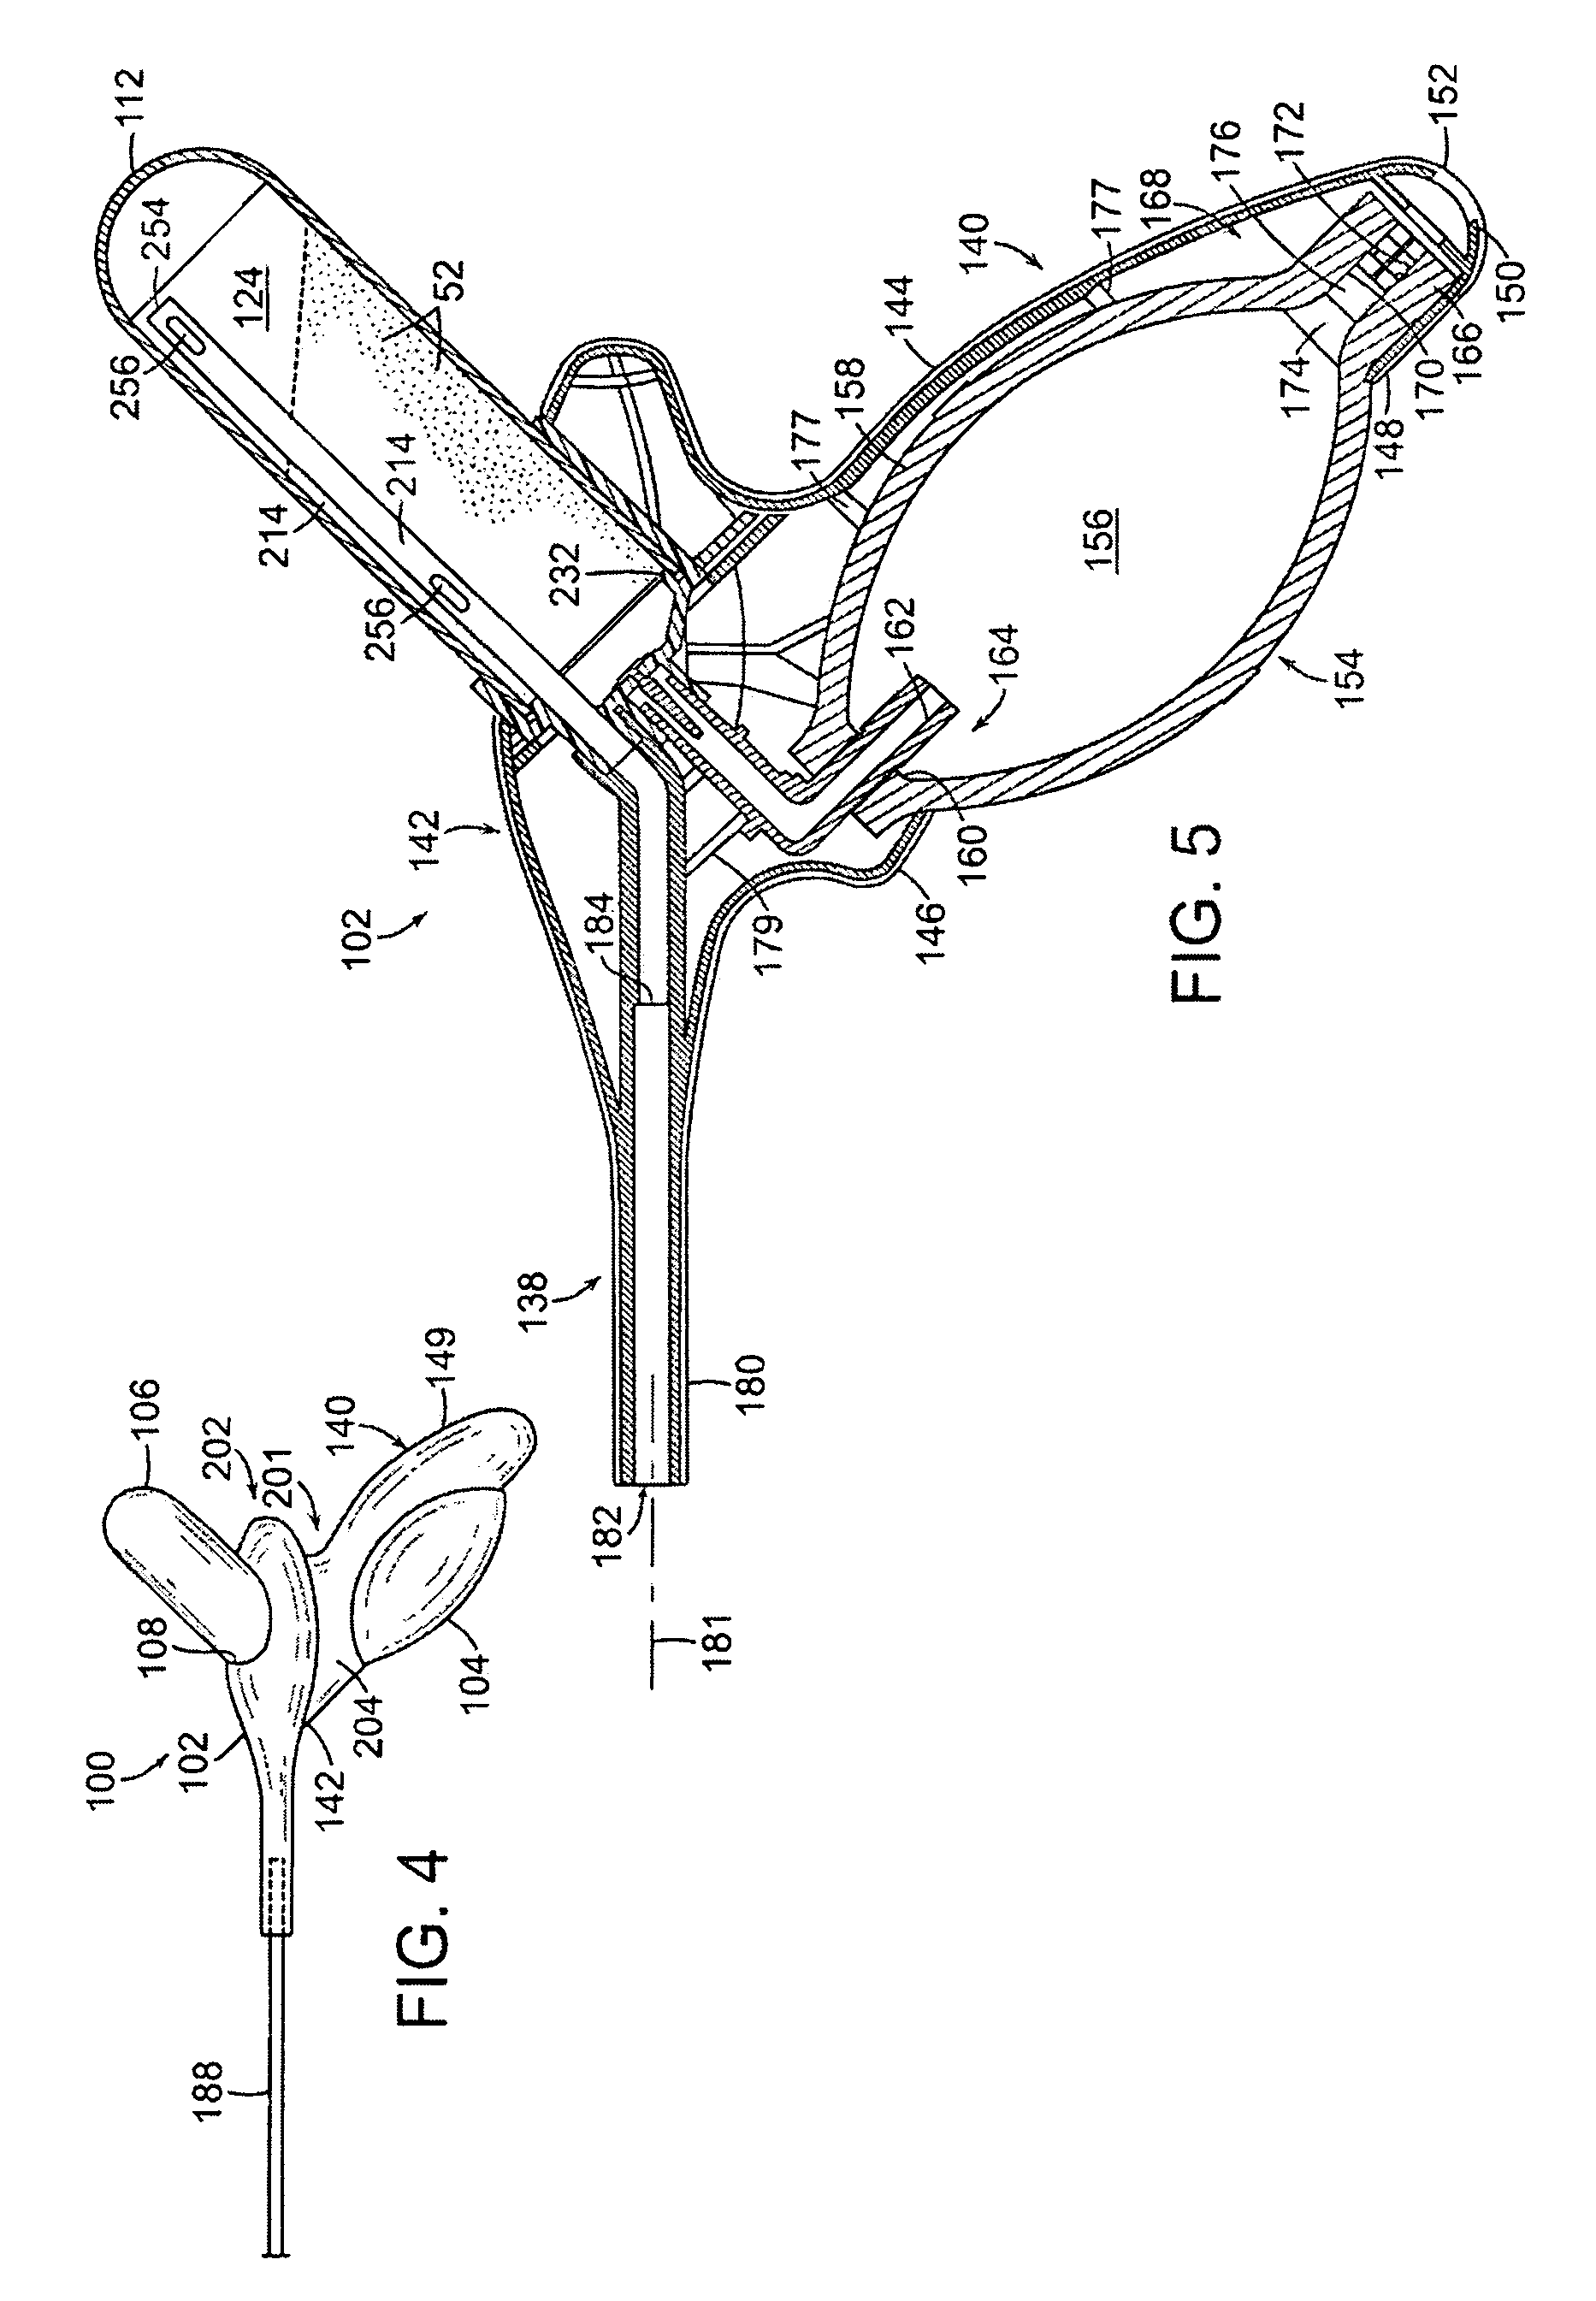 Powder delivery device